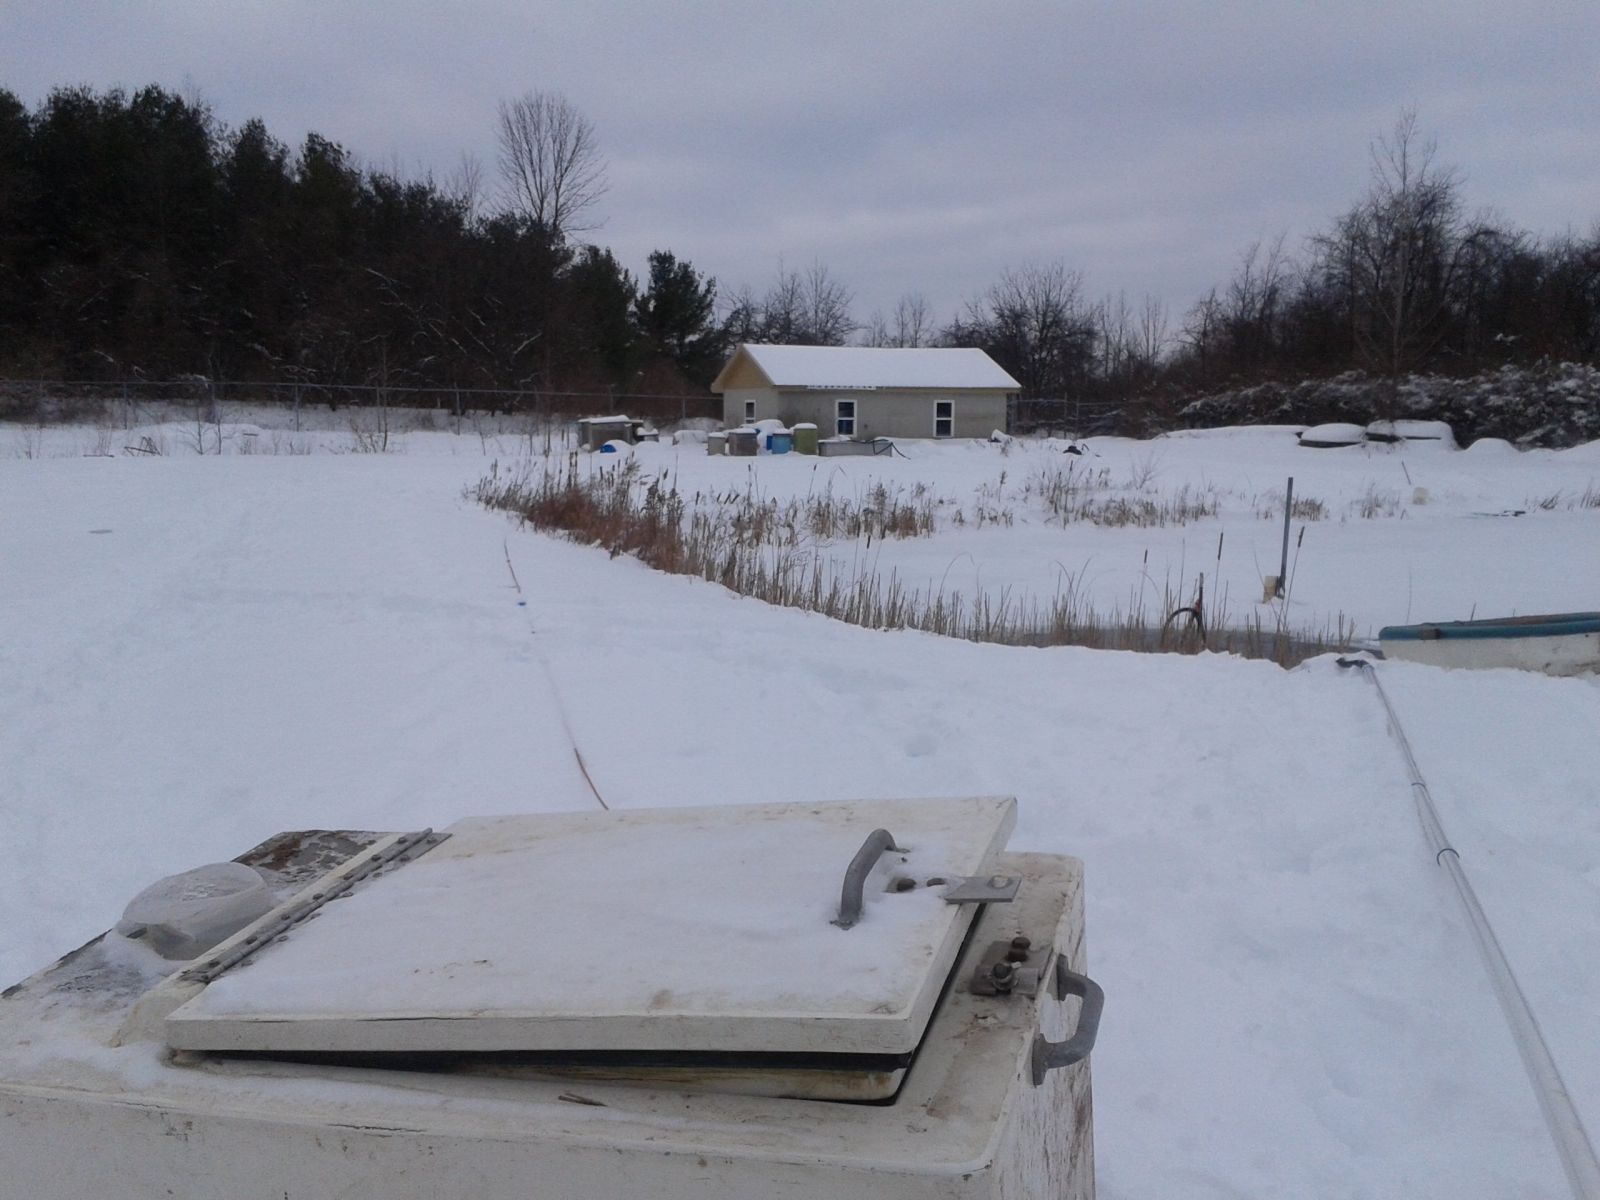 SUNY Brockport aquaculture ponds and facility in 2+ feet of snow